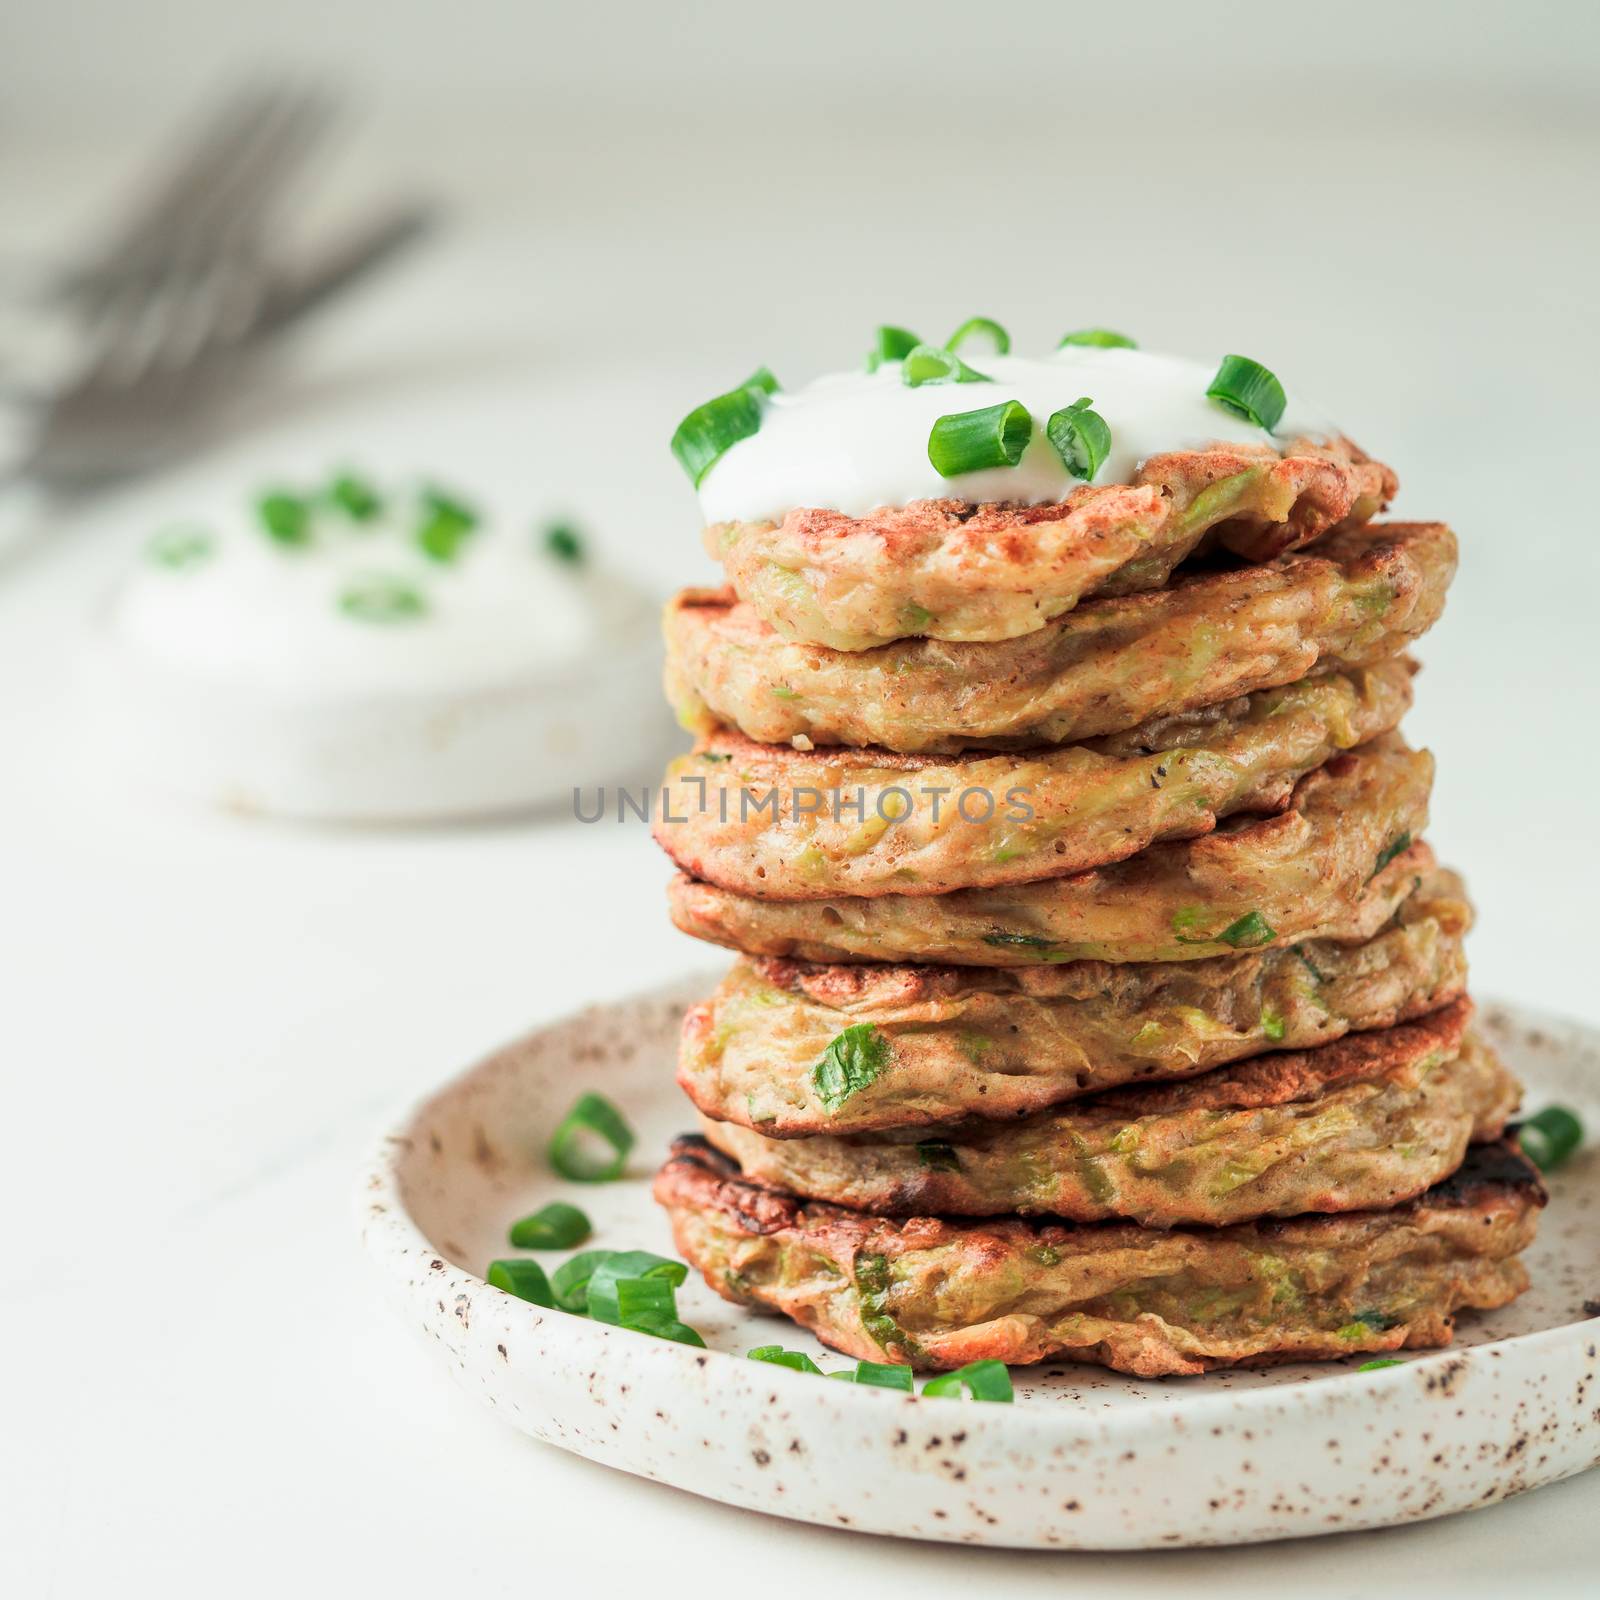 Zucchini fritters. Traditional zucchini fritters in stack on white background. Zucchini pancakes or fritters with green onion and parmesan cheese,served sour cream or greek yogurt. Copy space for text